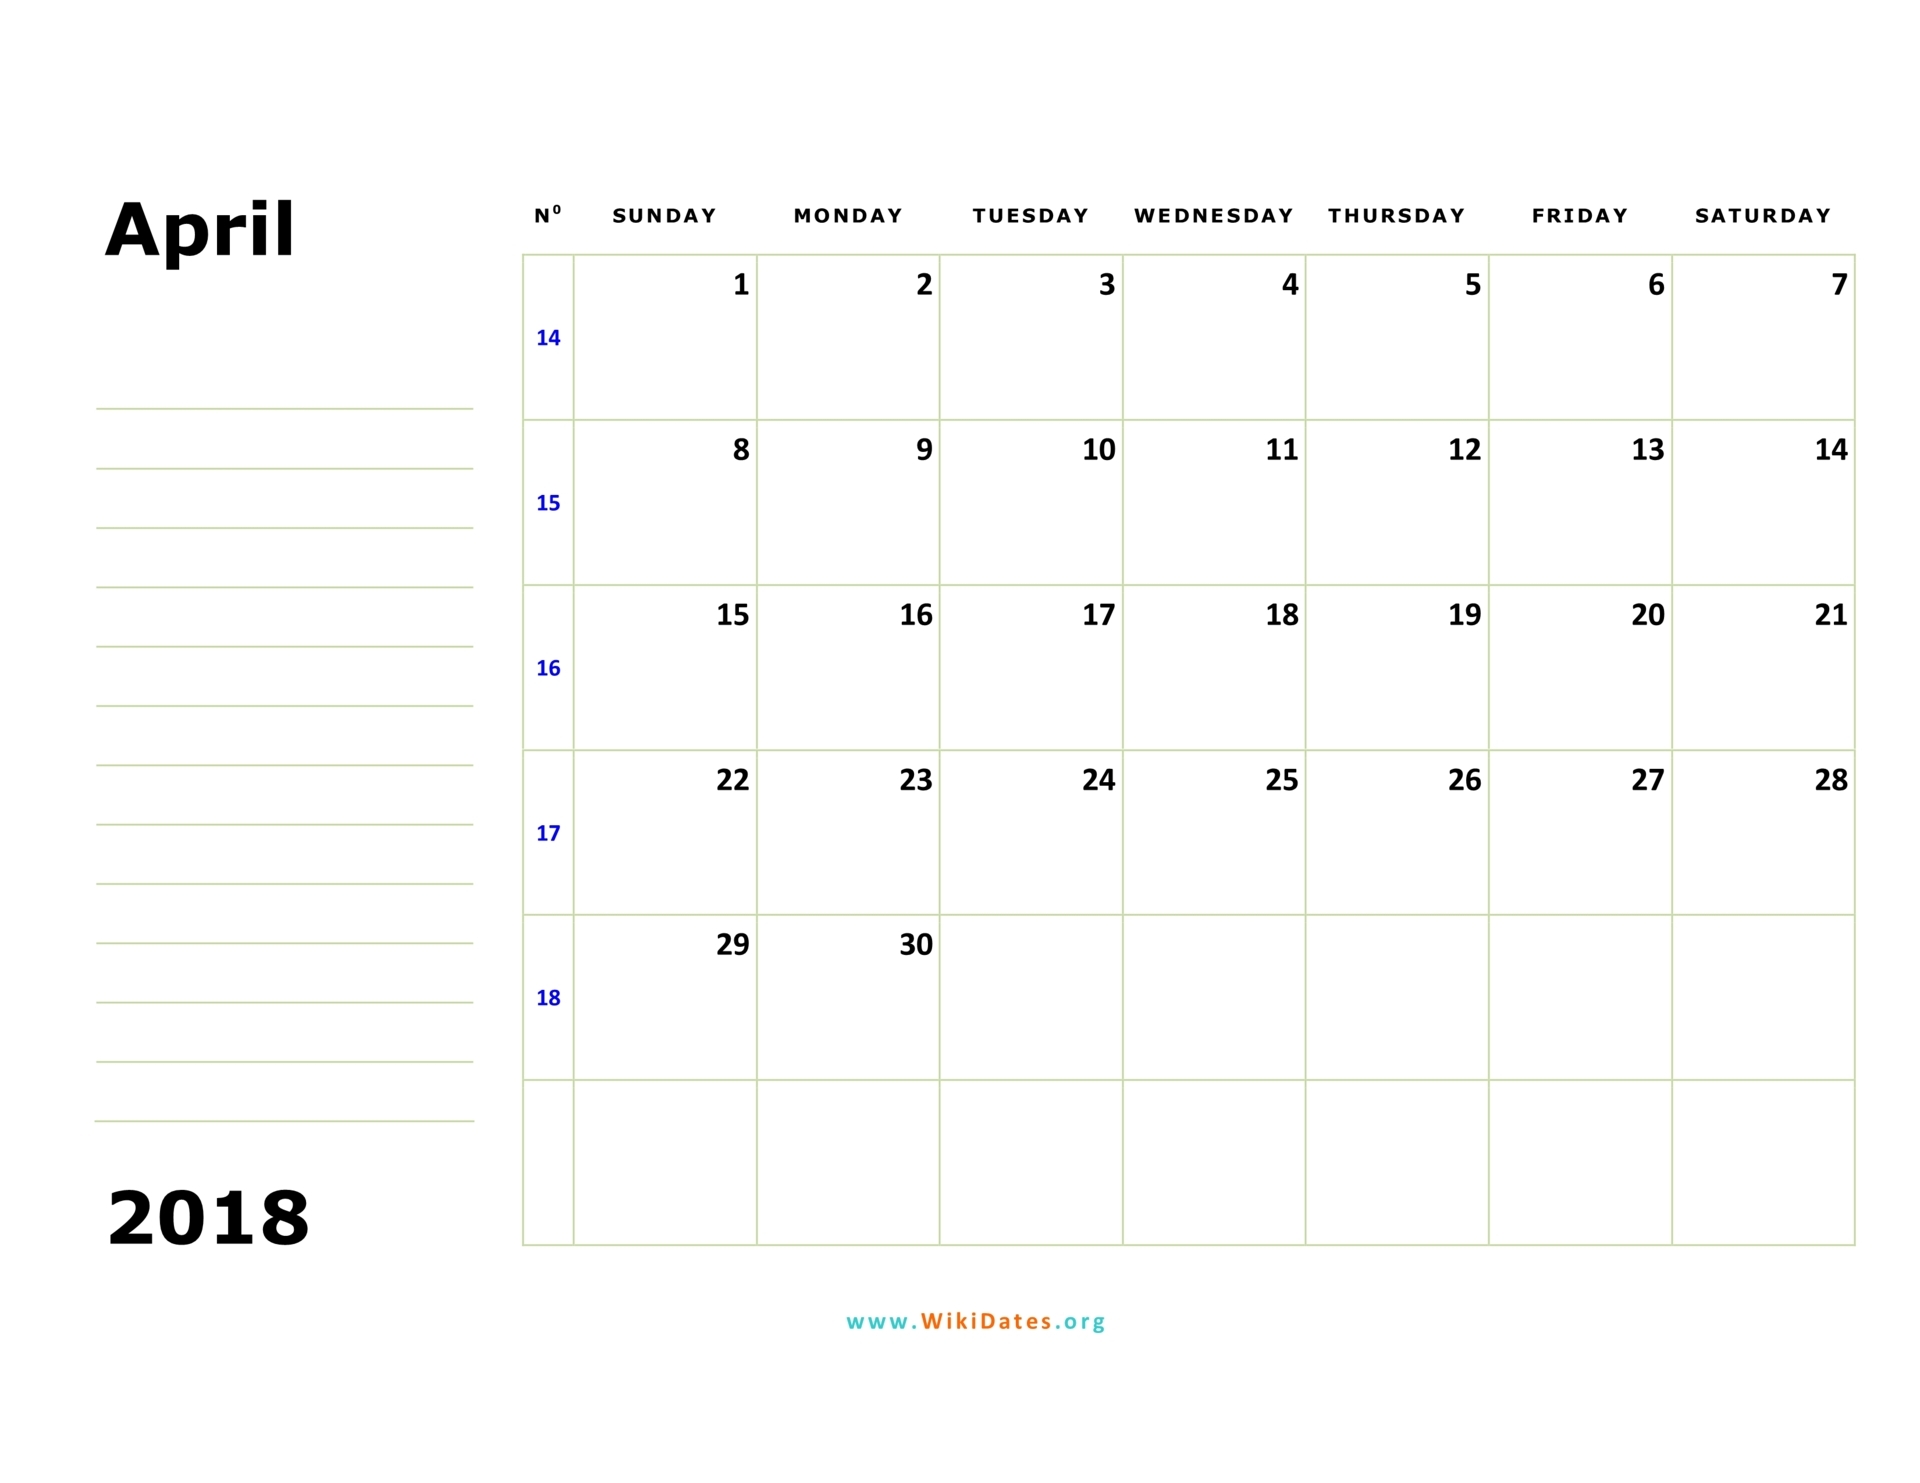 calendar-april-2018-uk-with-excel-word-and-pdf-templates